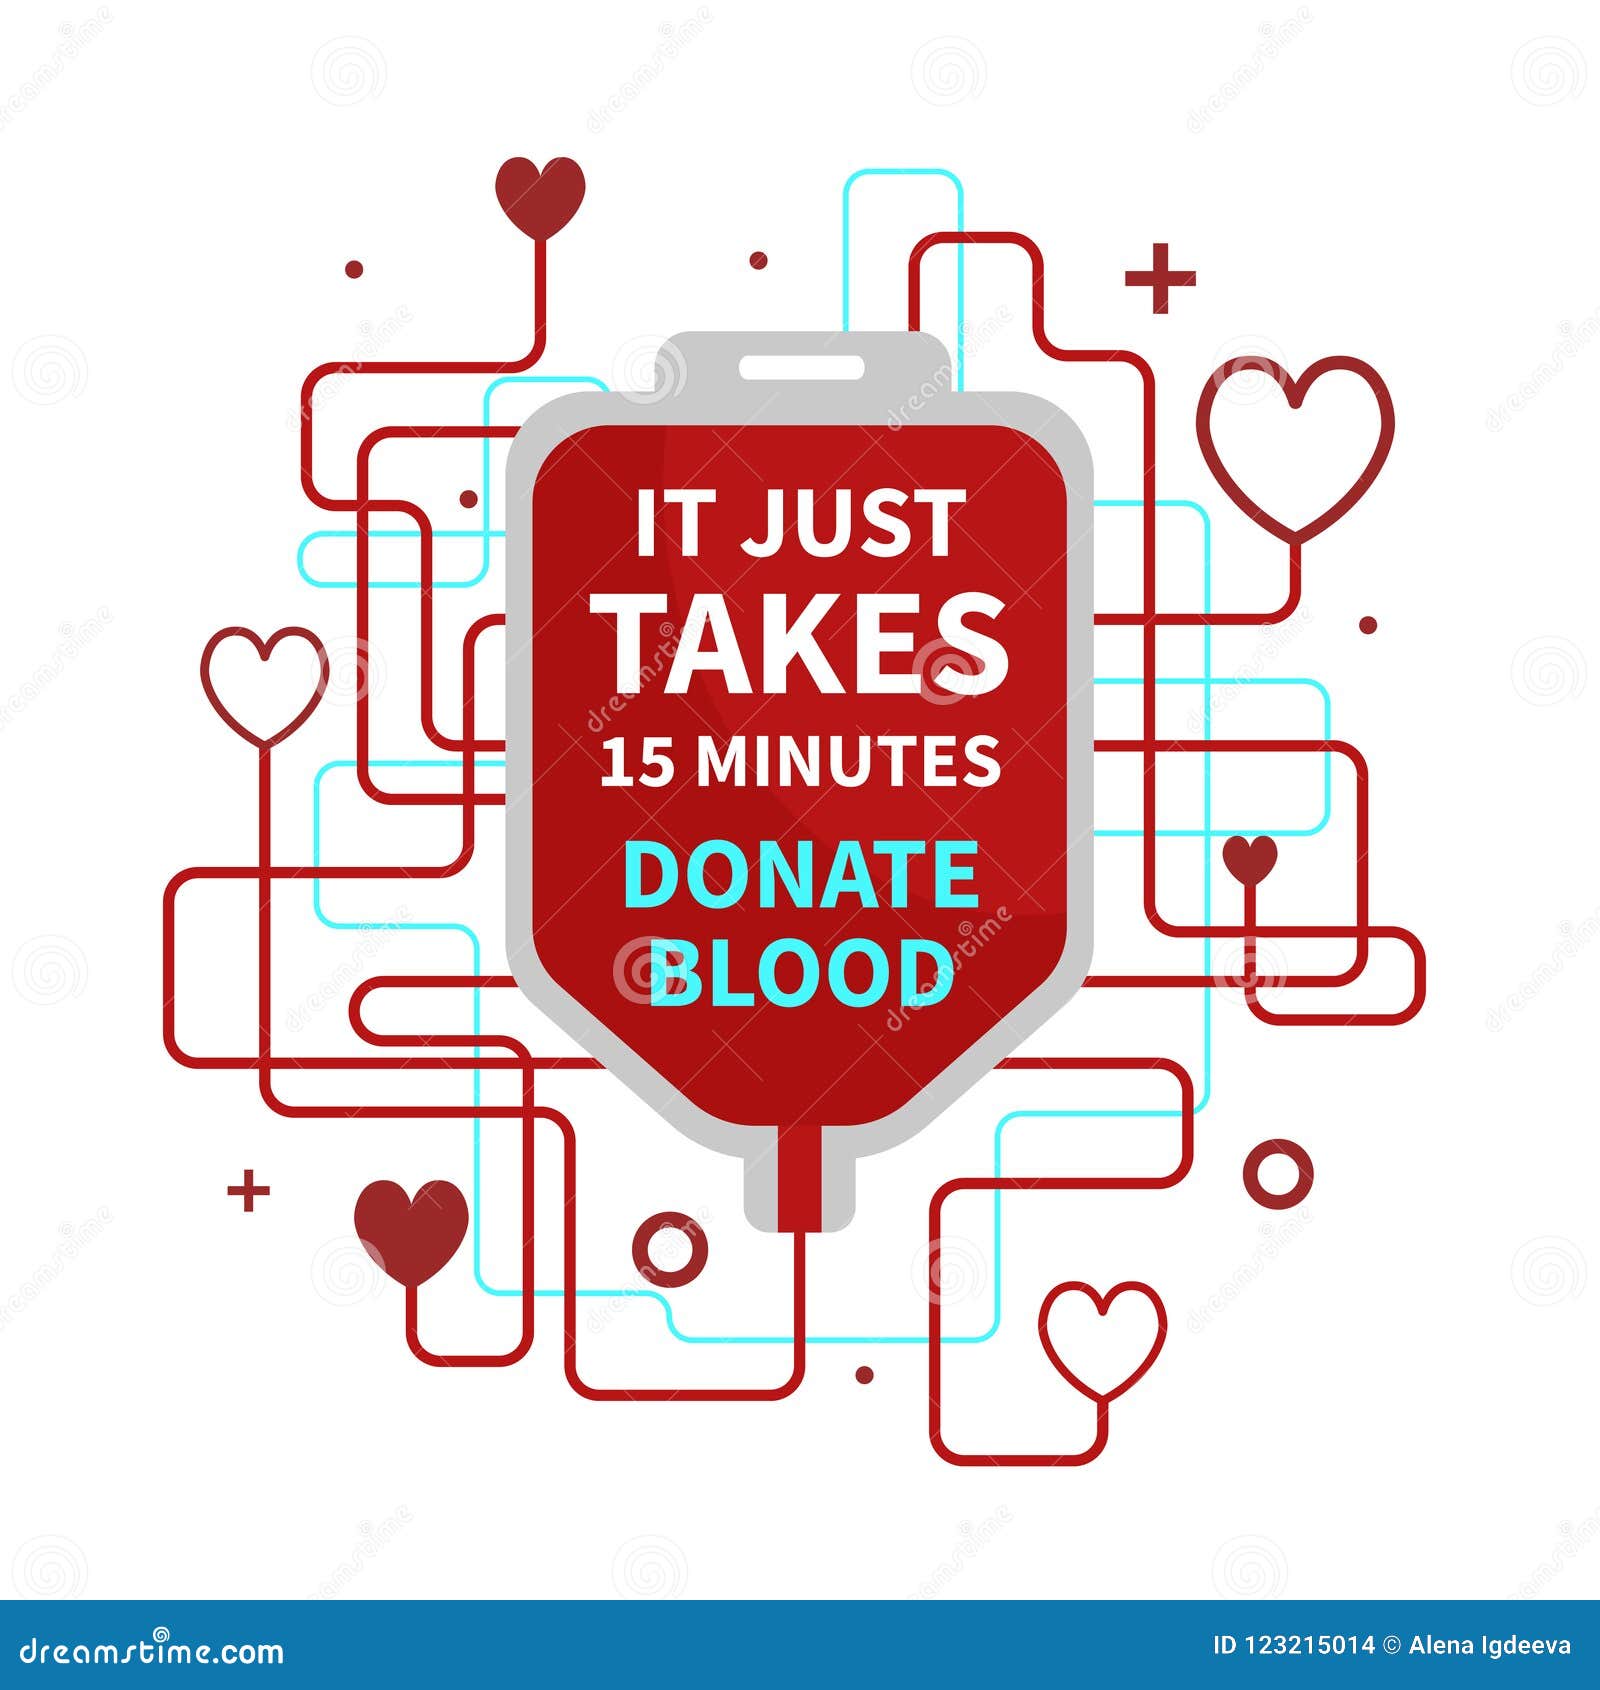 Please Donate Simple Donation Text Message Stock Illustration